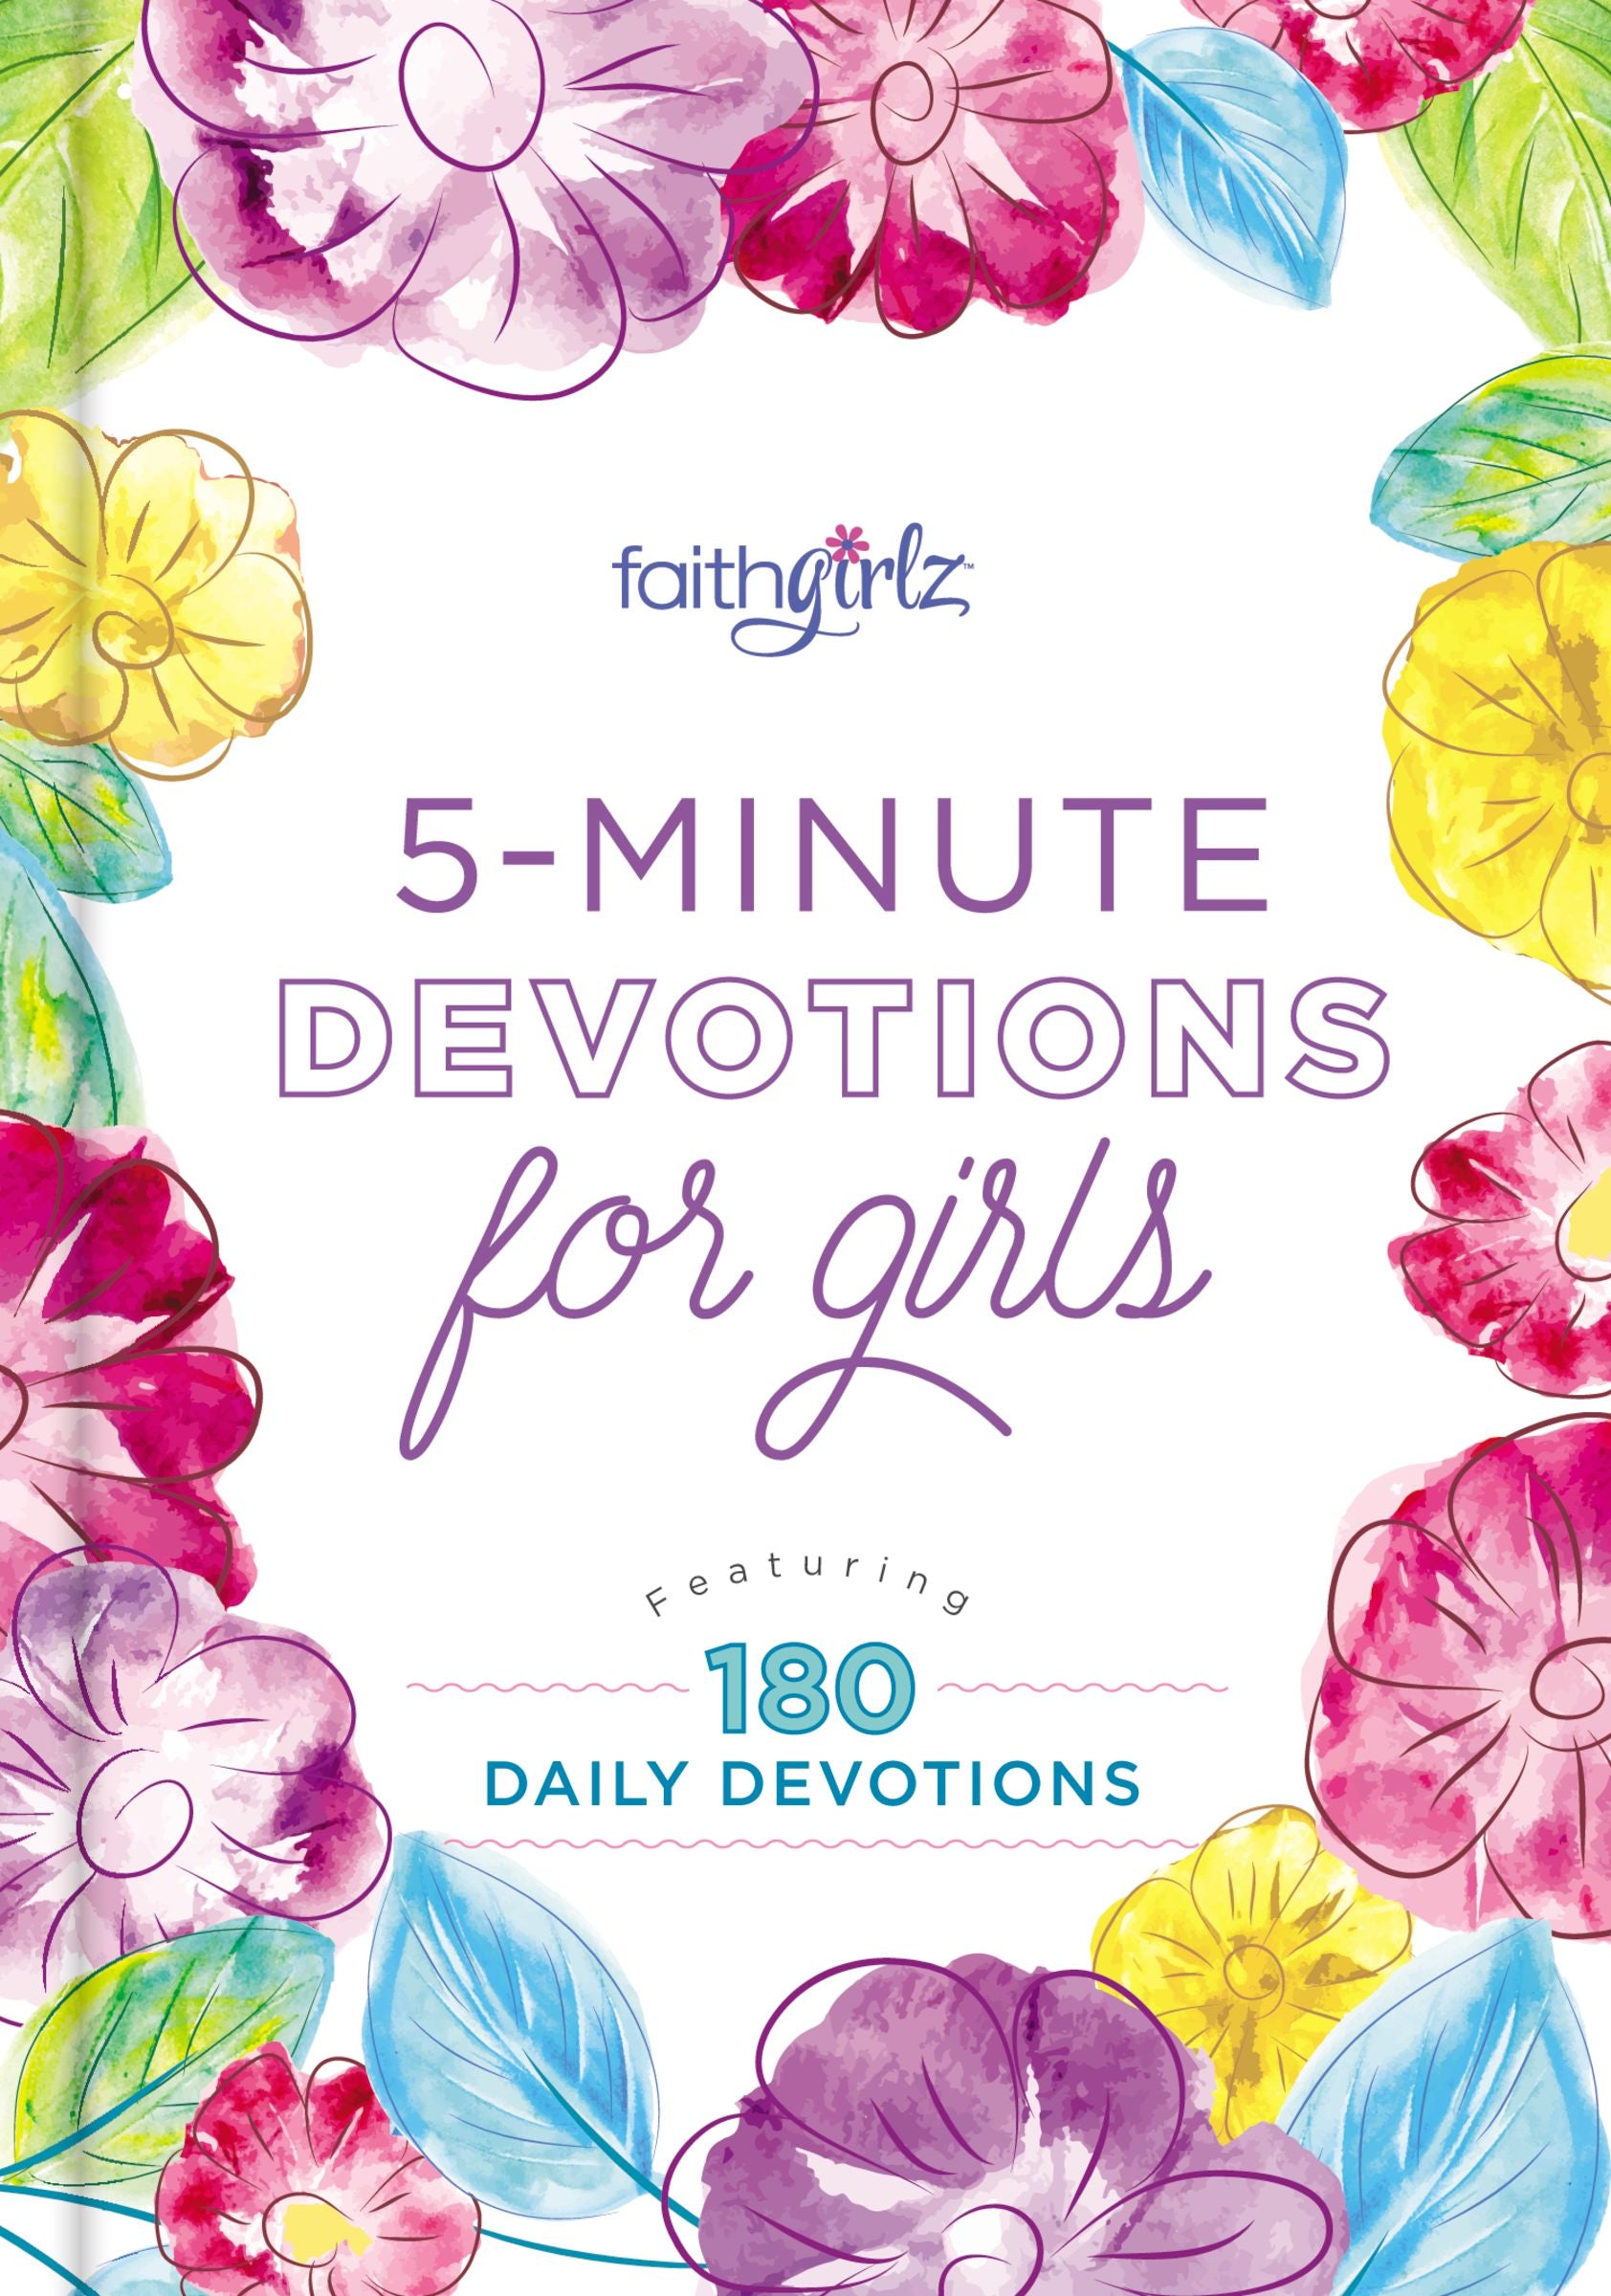 Image of 5-Minute Devotions for Girls other